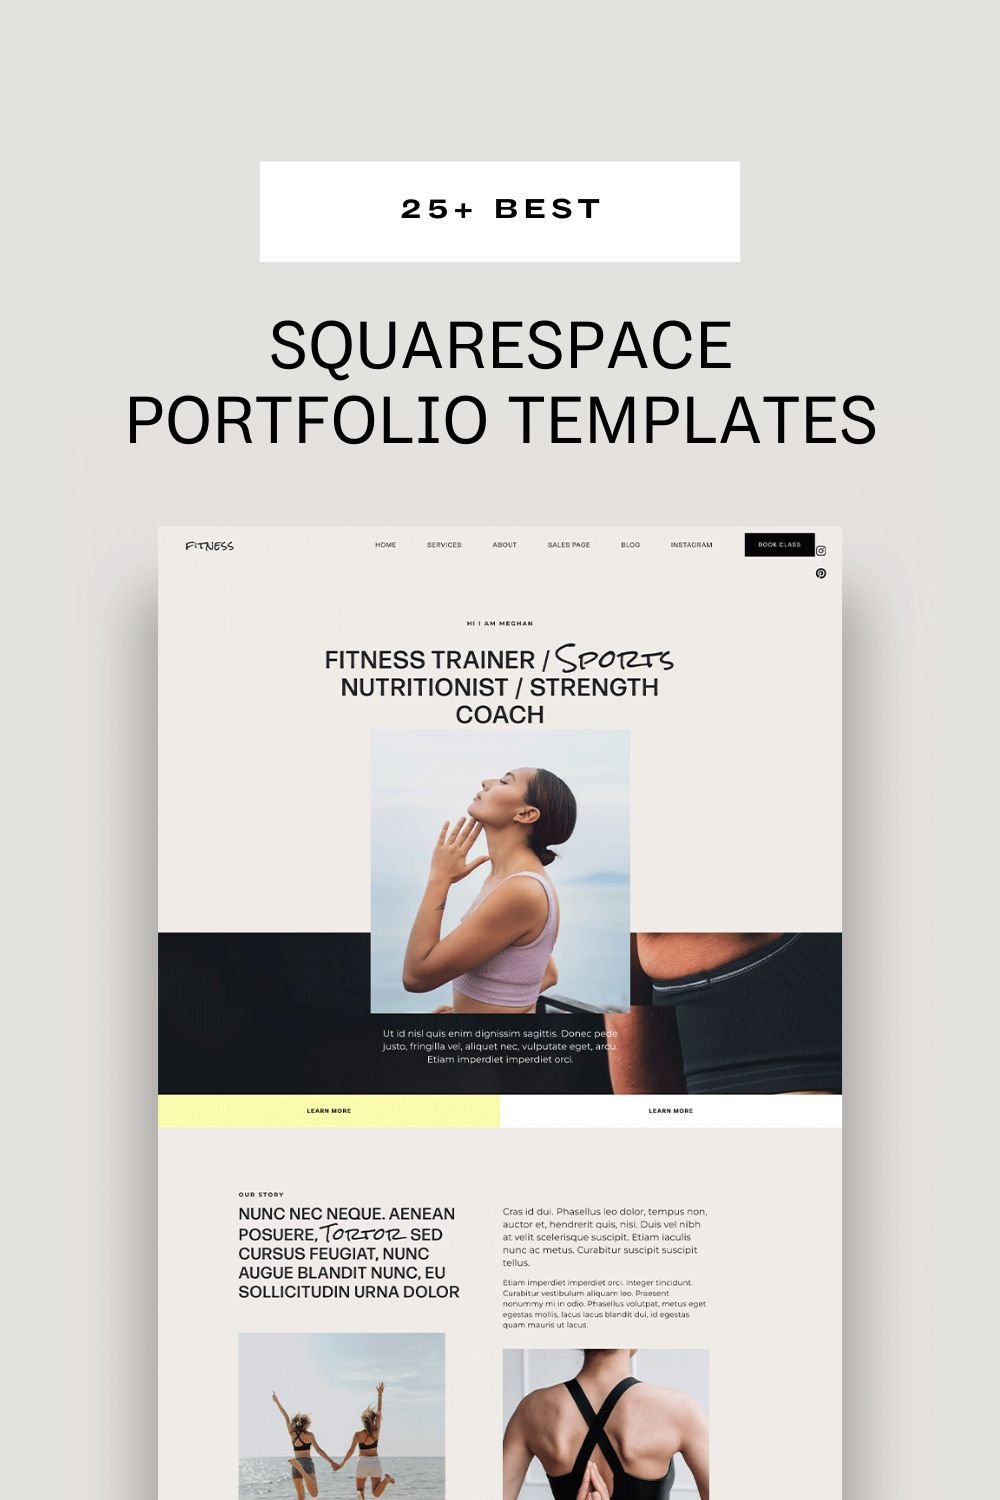 21+ Best Squarespace Portfolio Templates to Show Off Your Work